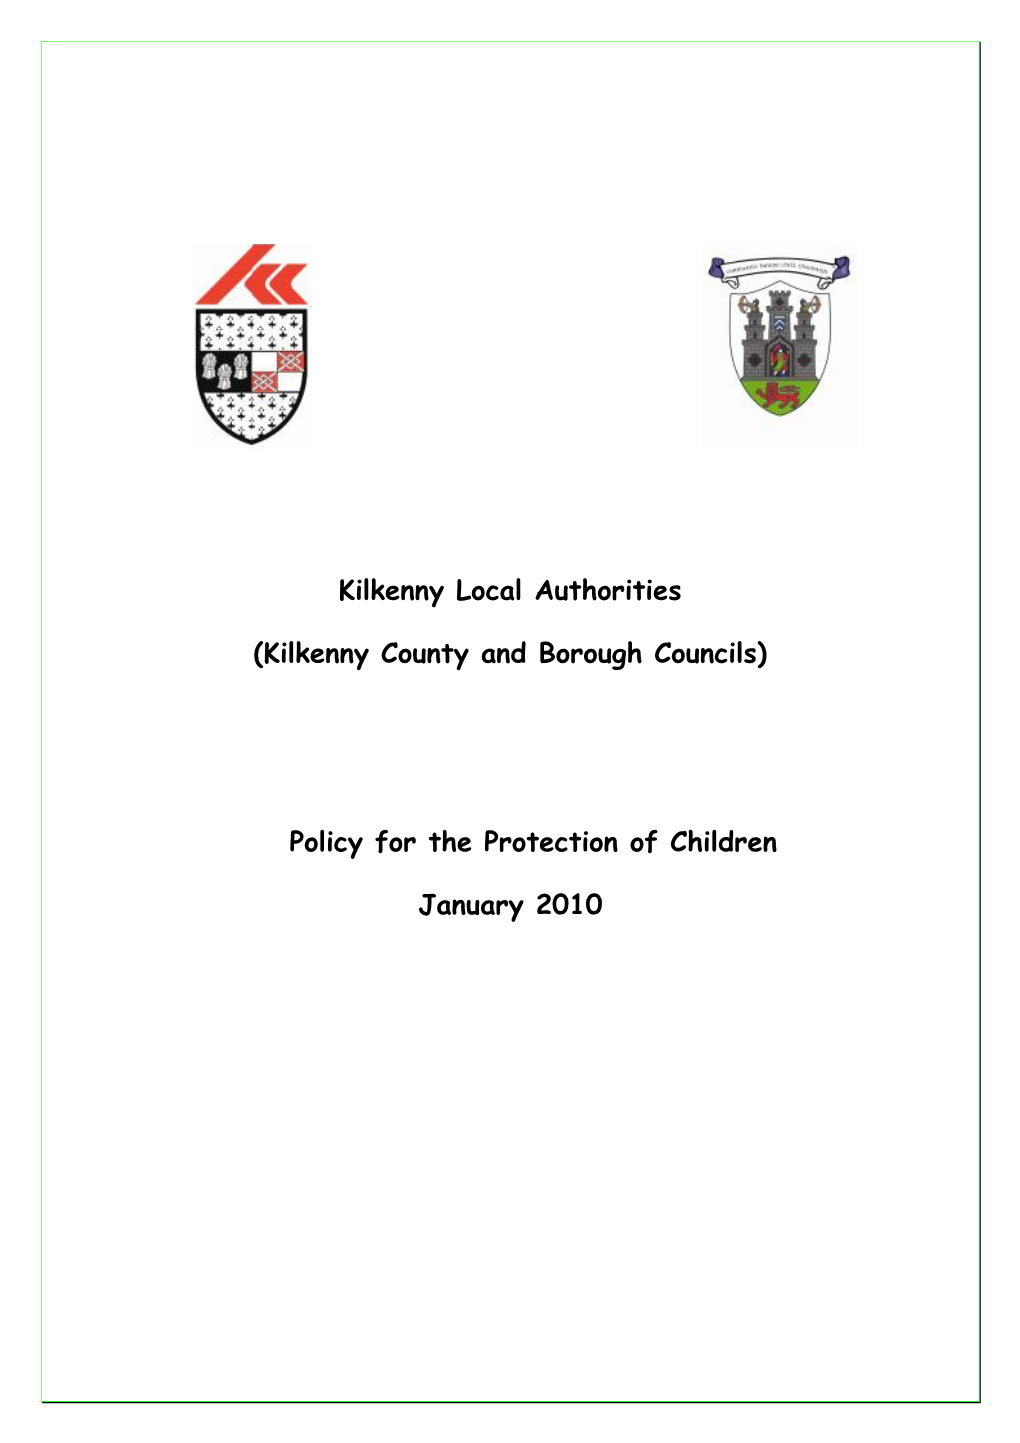 Guidelines for the Protection of Children